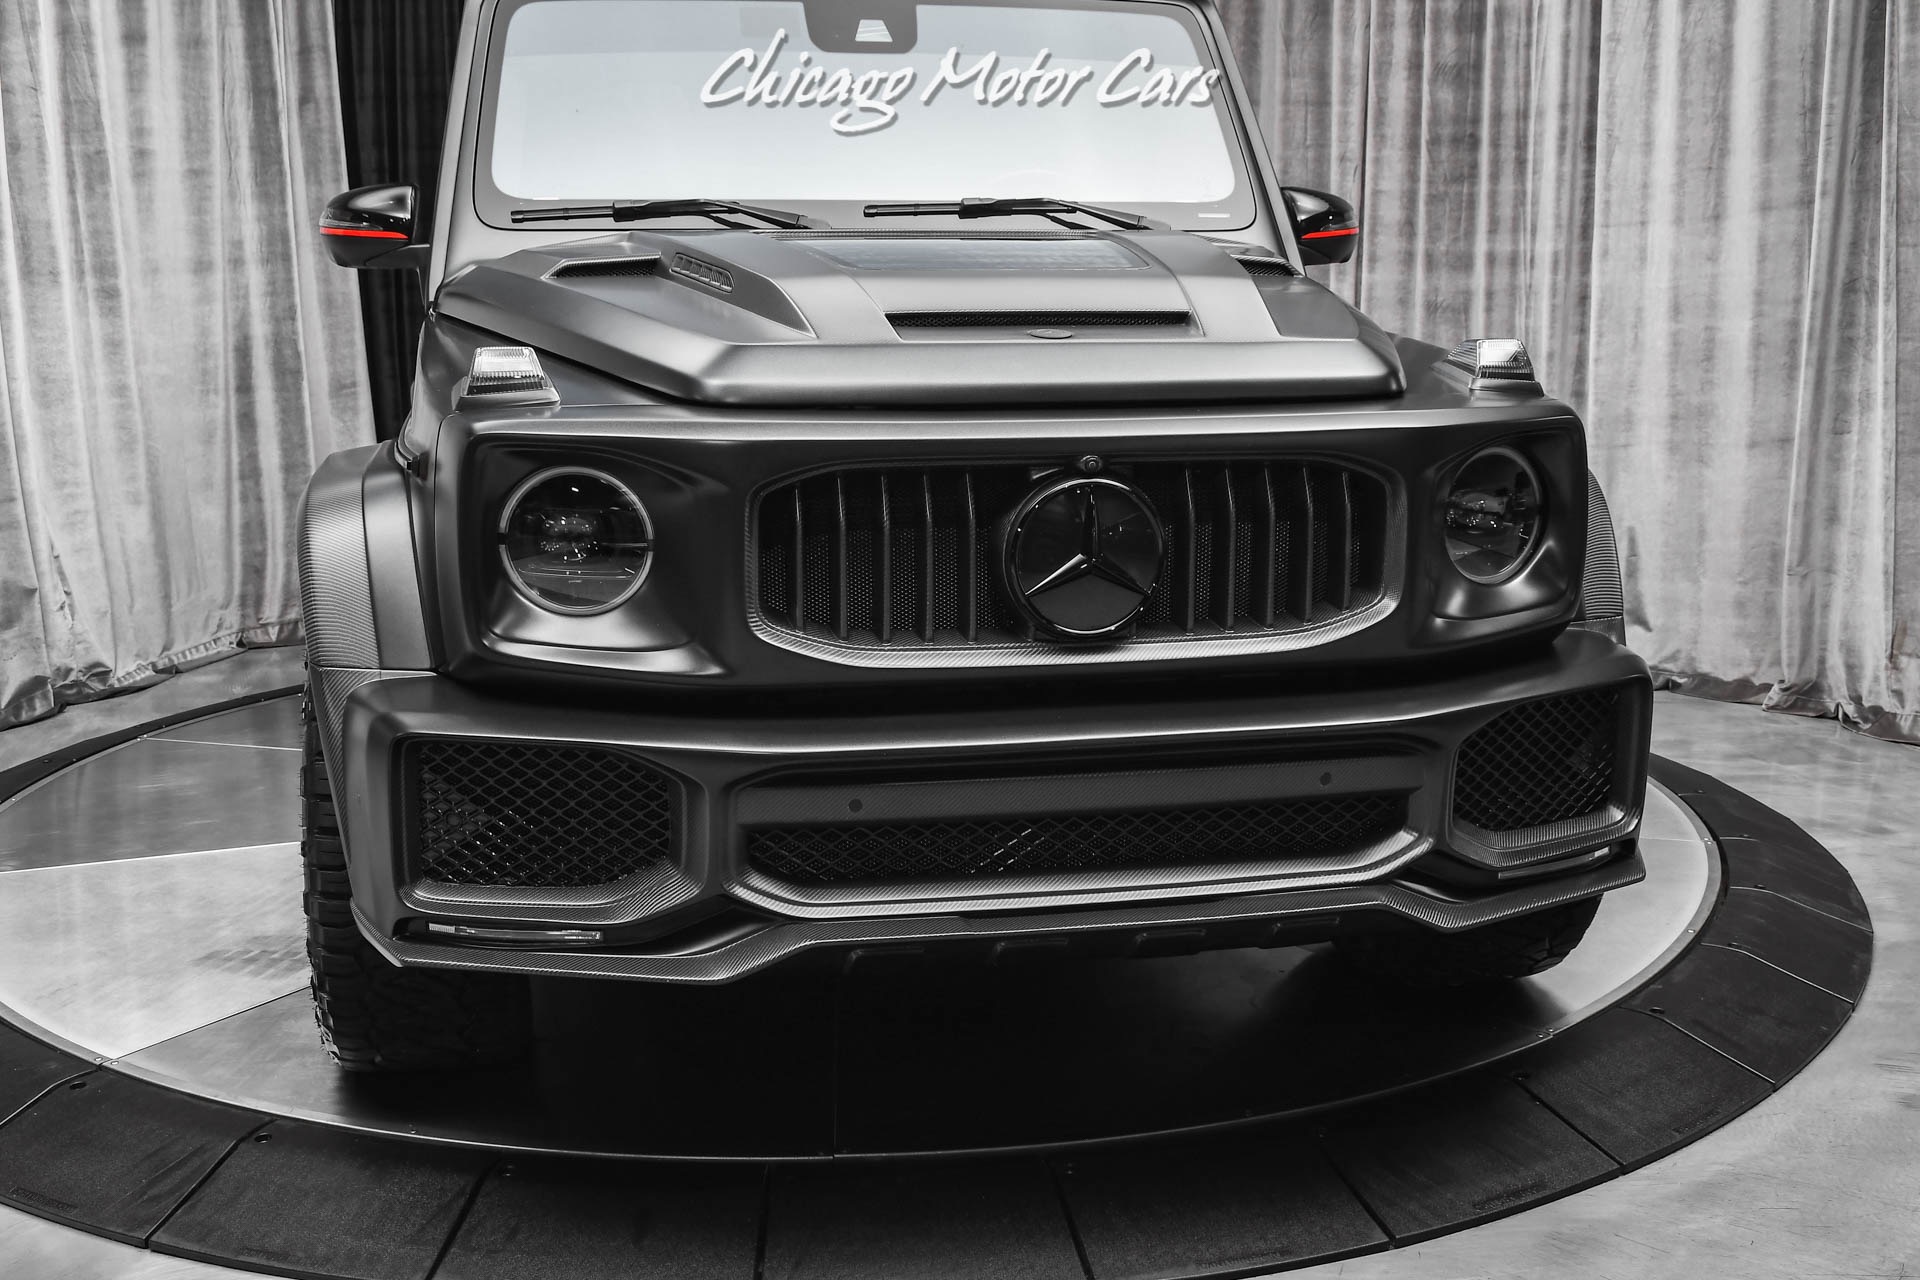 Used-2019-Mercedes-Benz-G63-AMG-4Matic-SUV---Edition-1-IMP-Widebody-TONS-of-Carbon-Starlight-Headline